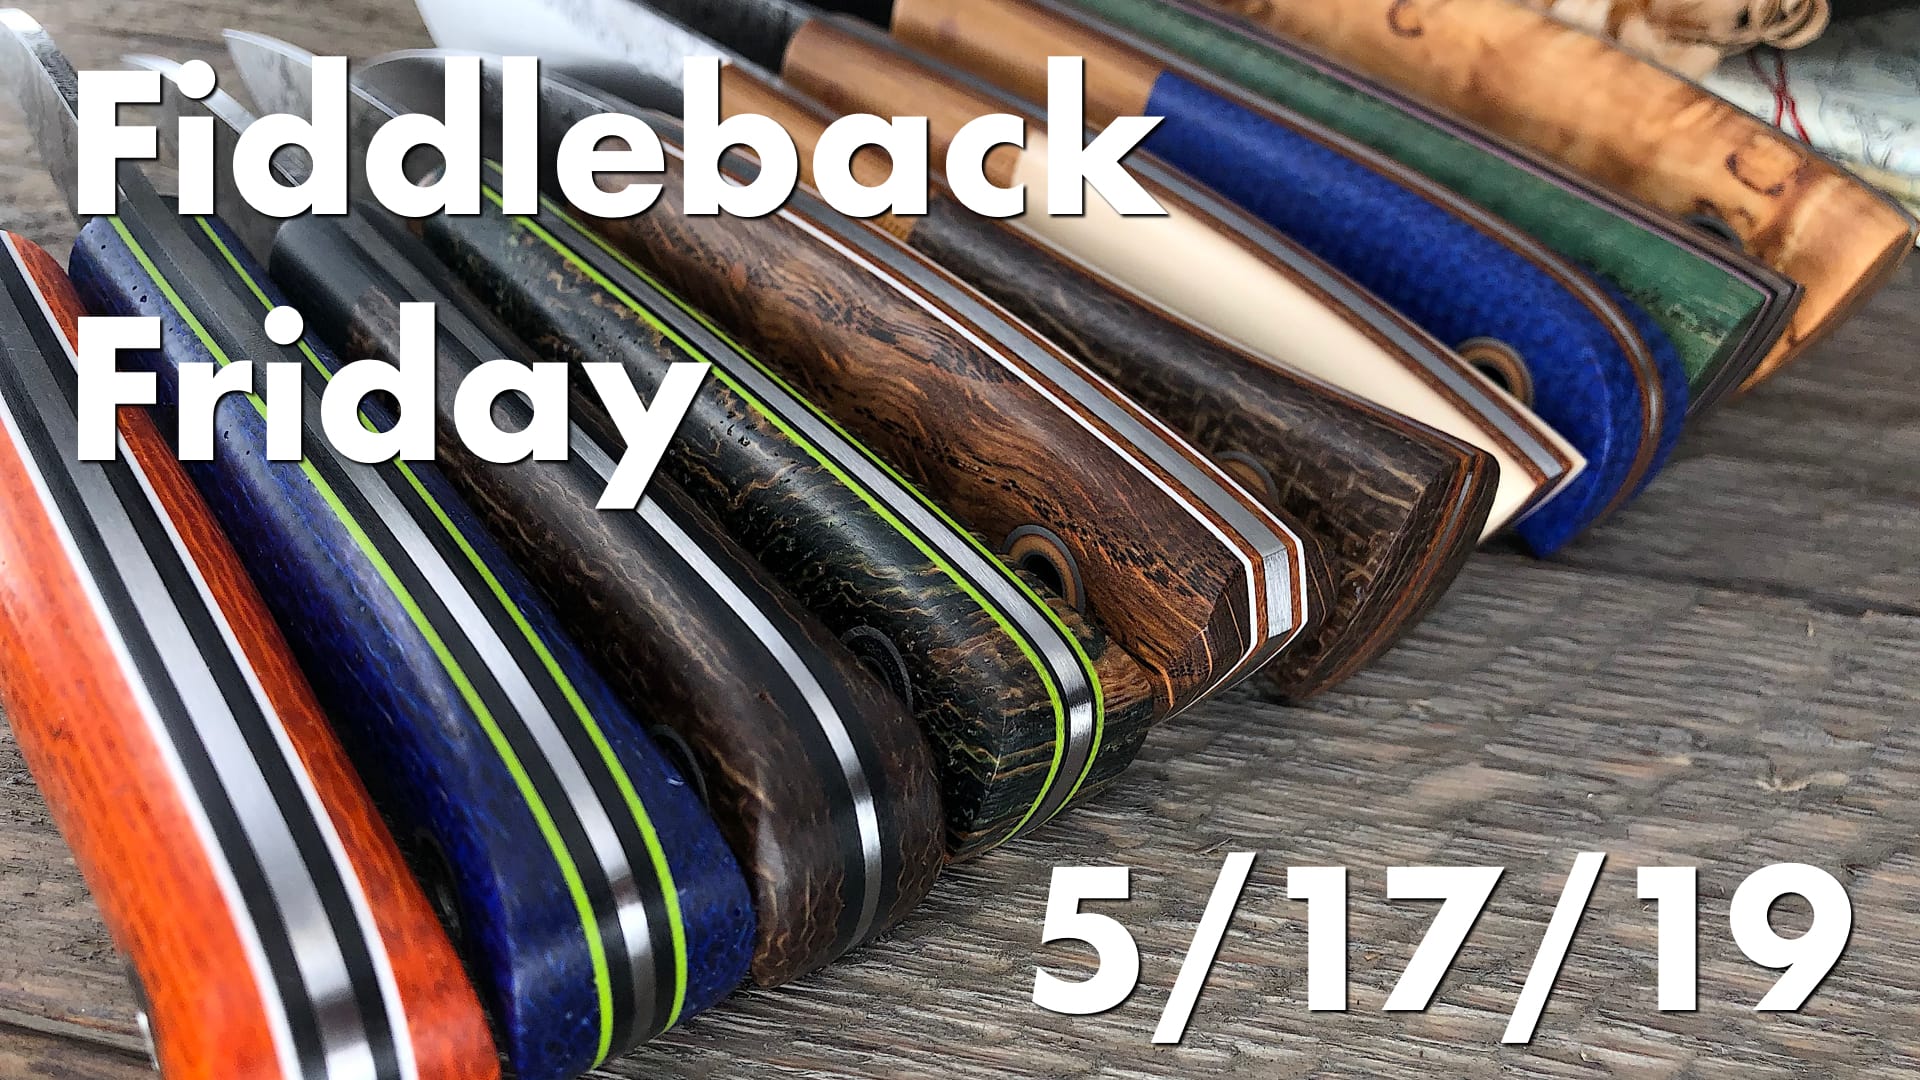 Fiddleback Friday 5/17/19 - Video Preview